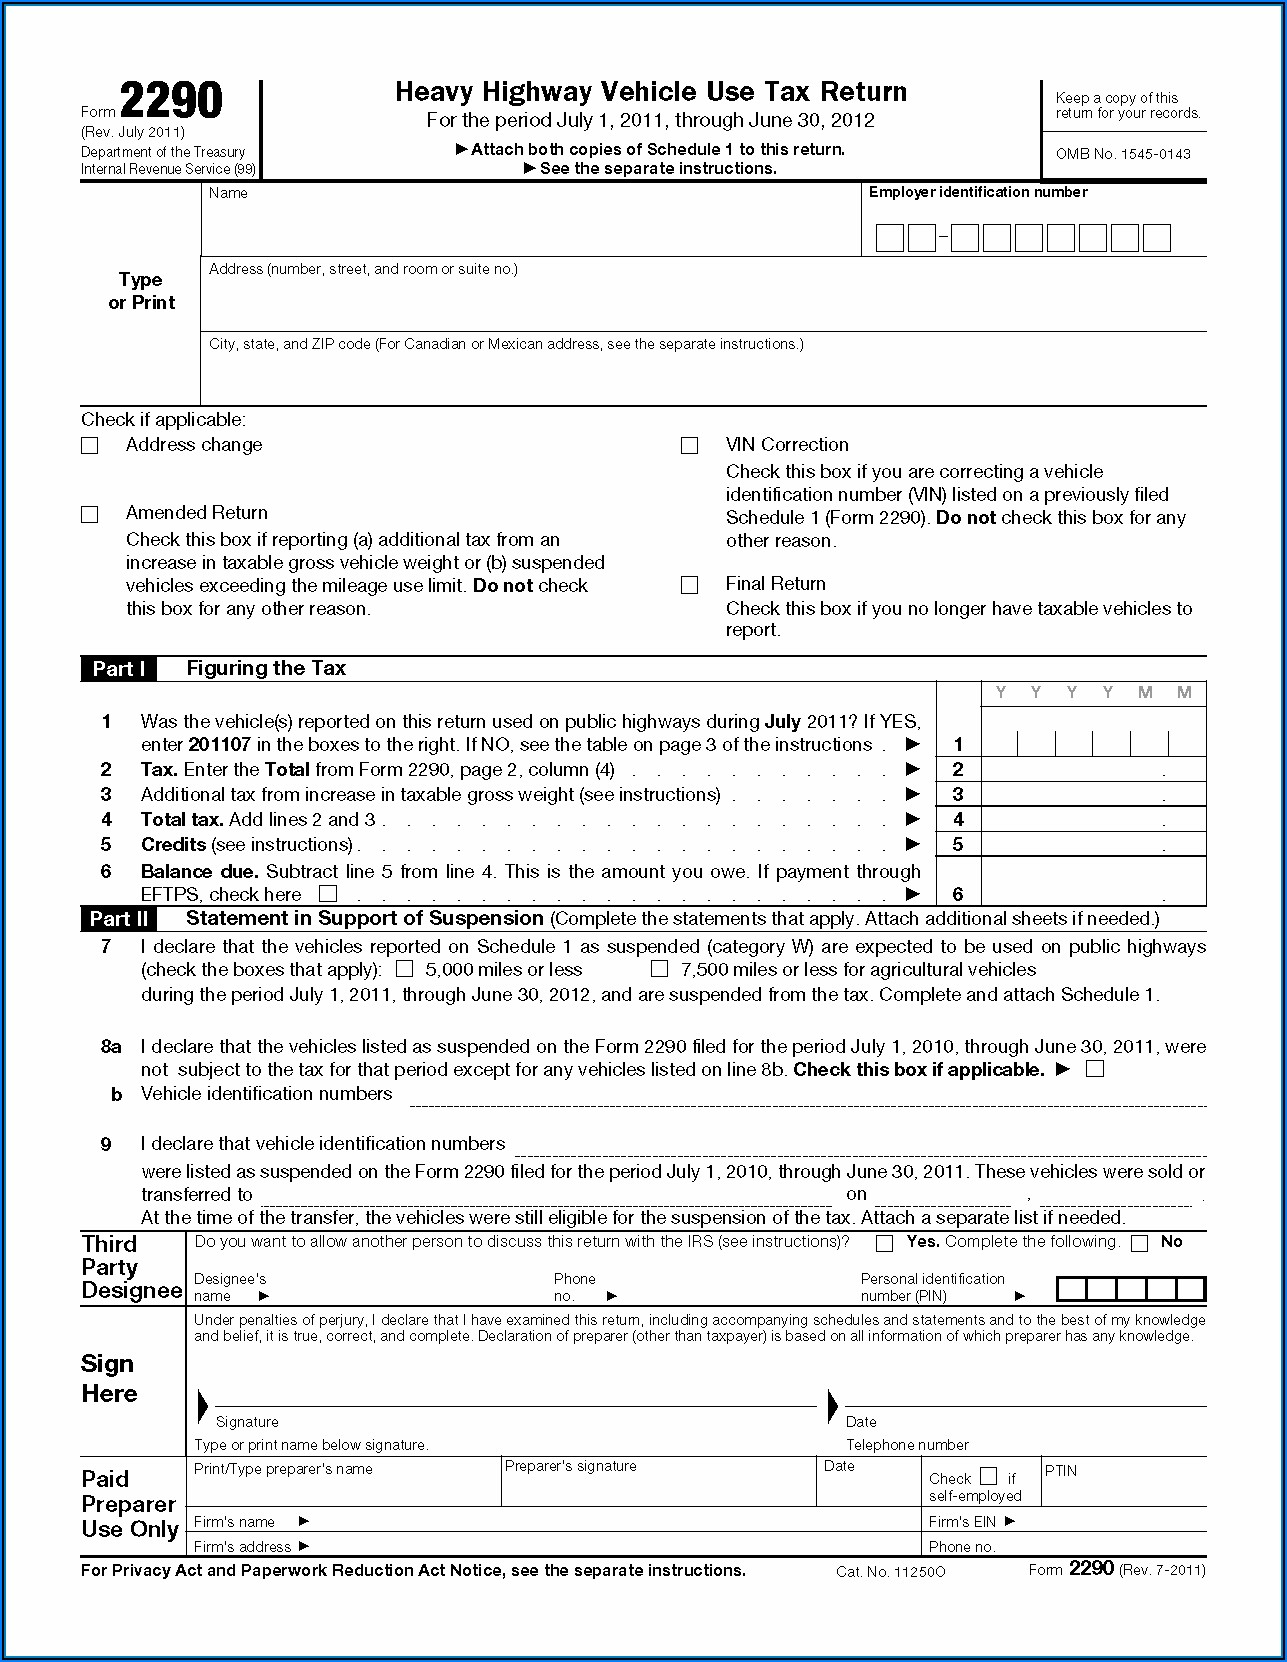 Heavy Highway Vehicle Use Tax Form 2290